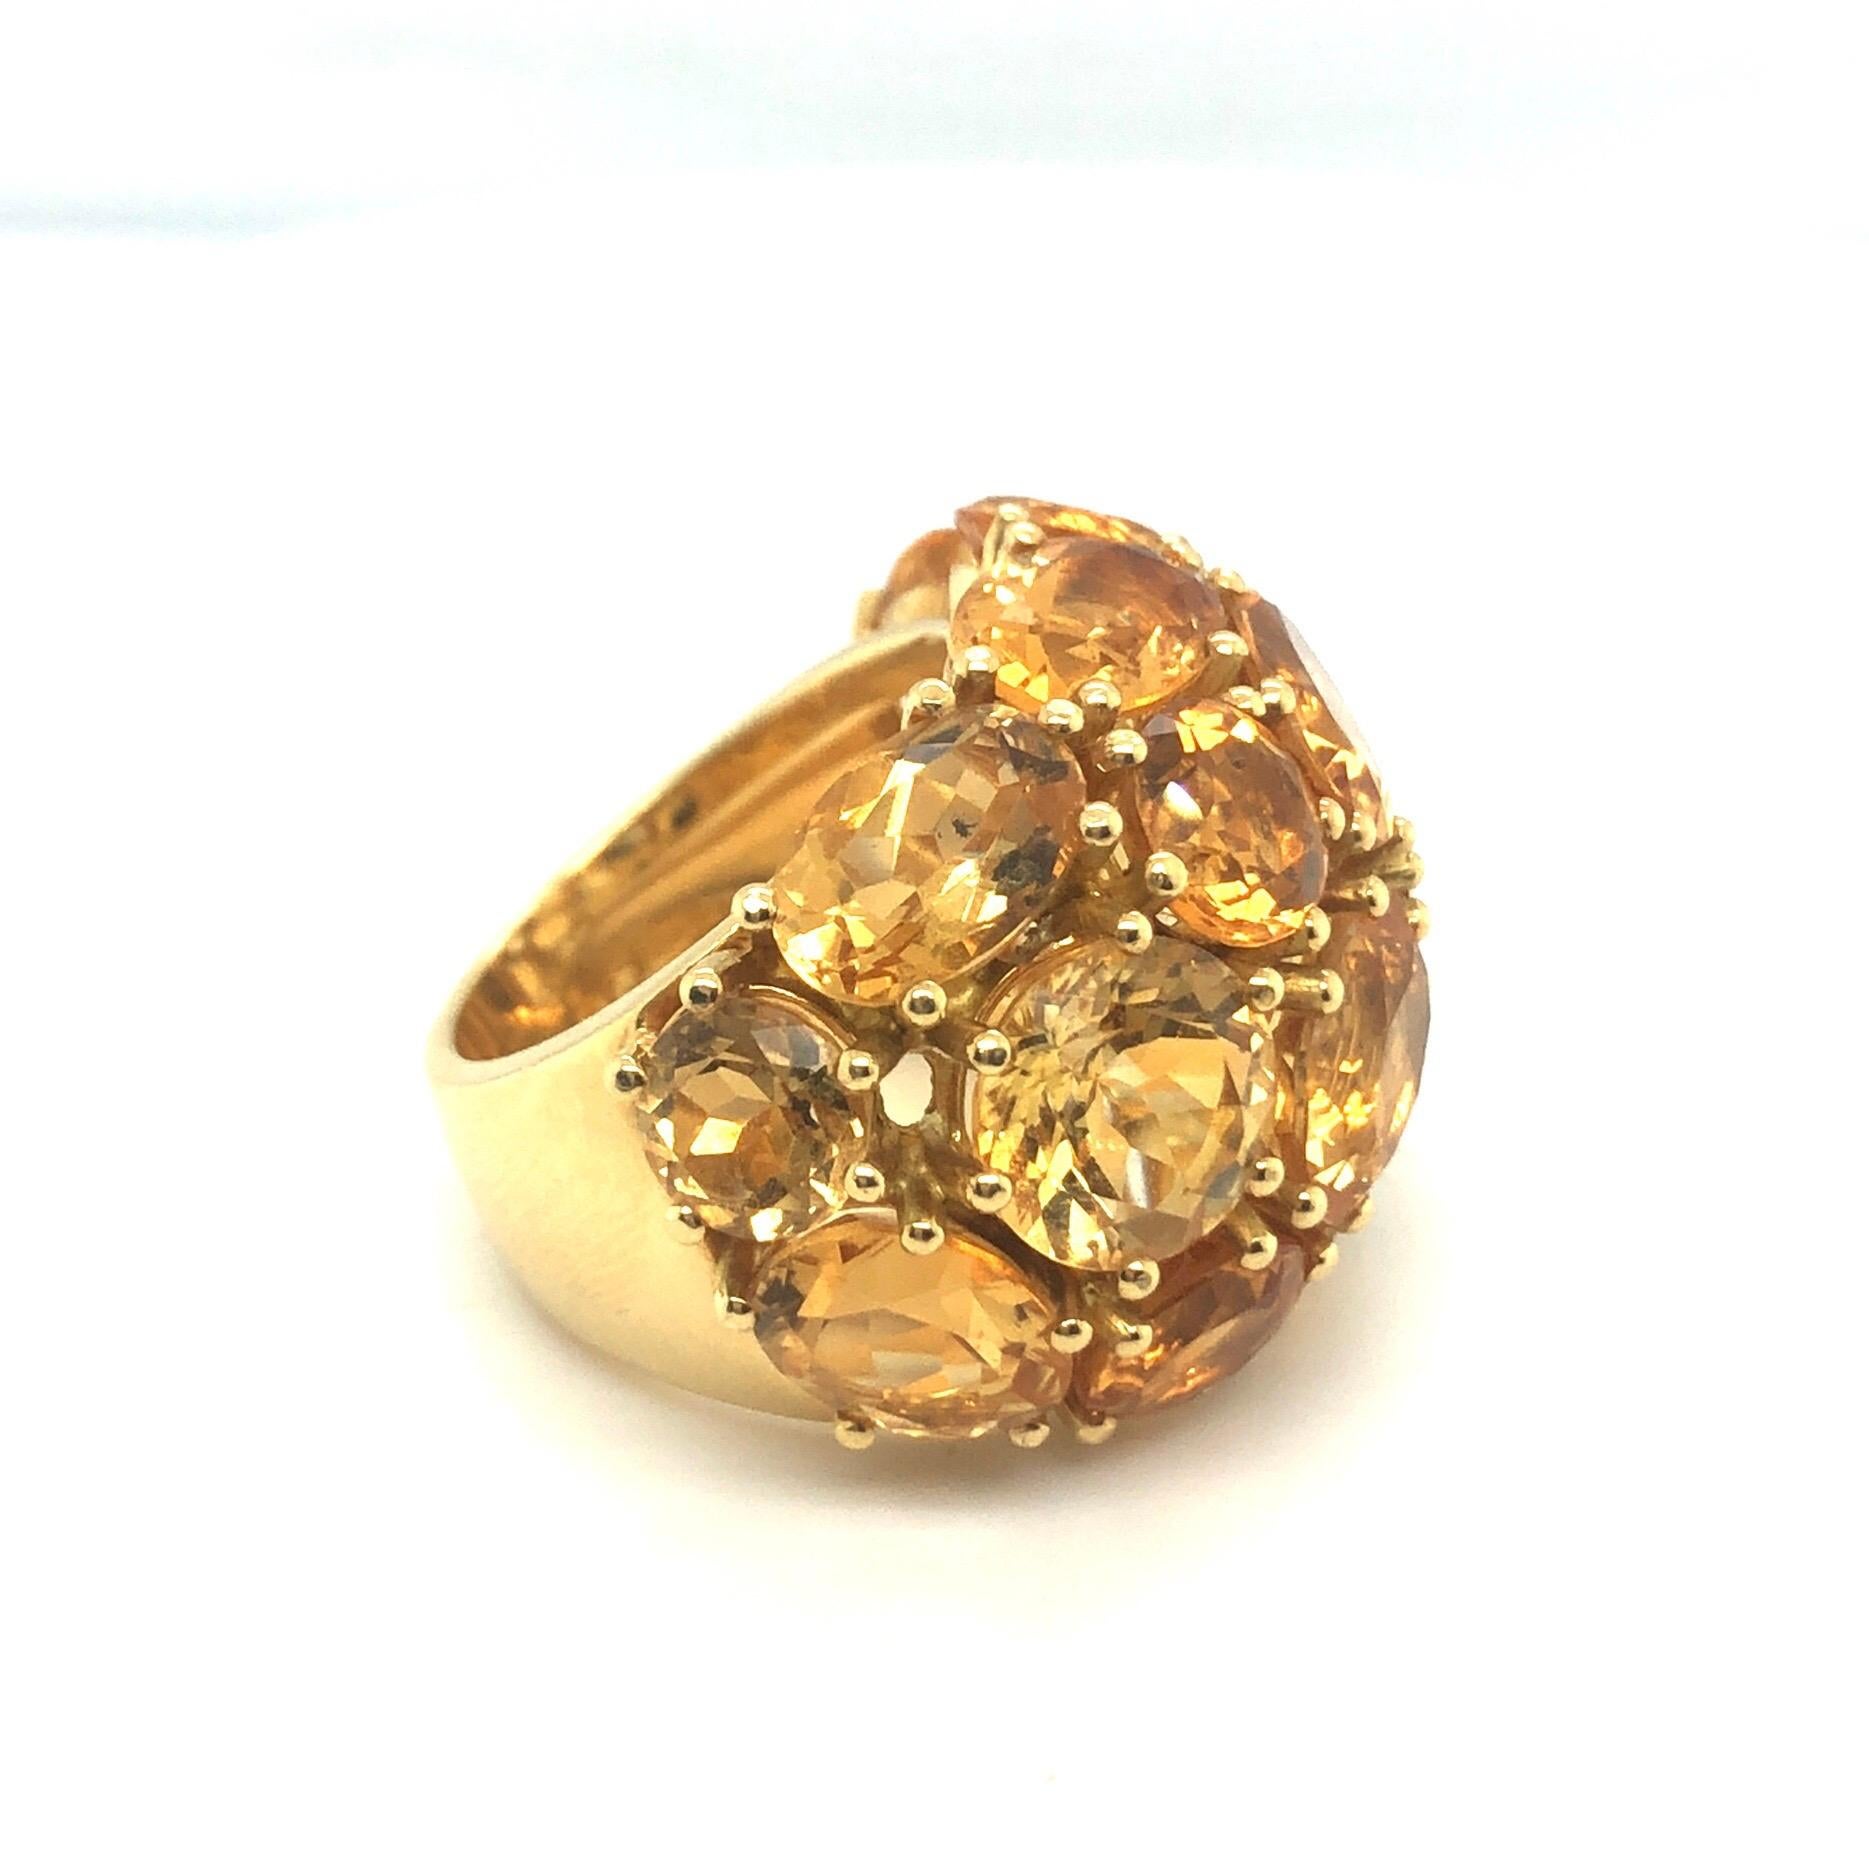 Oval Cut 18 Karat Yellow Gold and Citrine Cocktail Ring, circa 2000